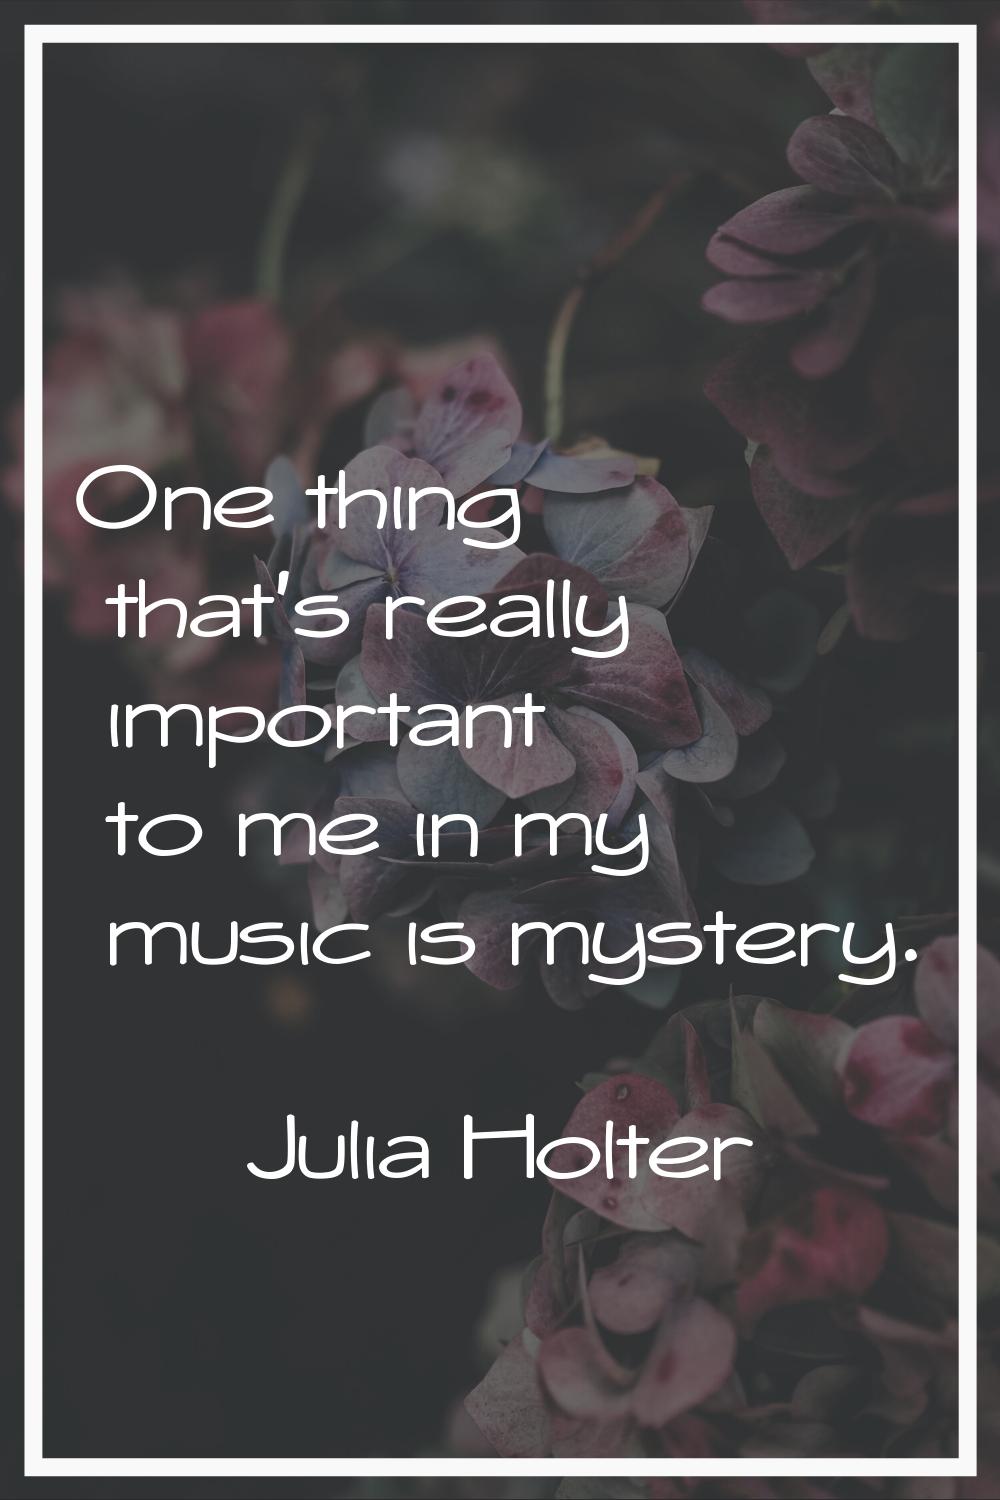 One thing that's really important to me in my music is mystery.